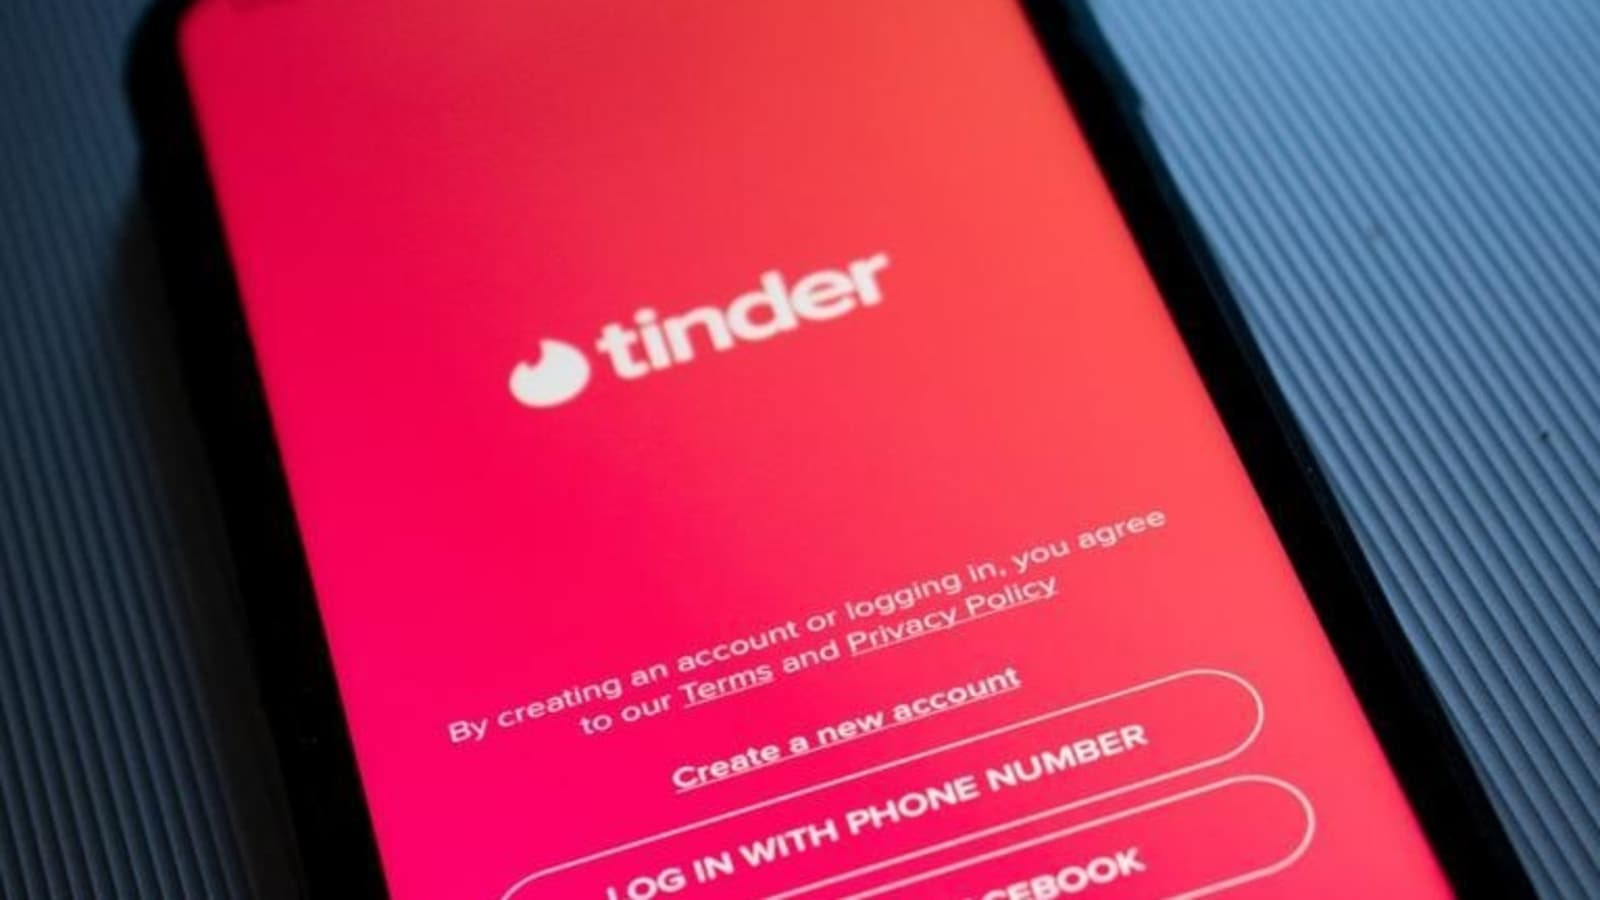 Woman asks Tinder match why she should date him, he replies with a presentation